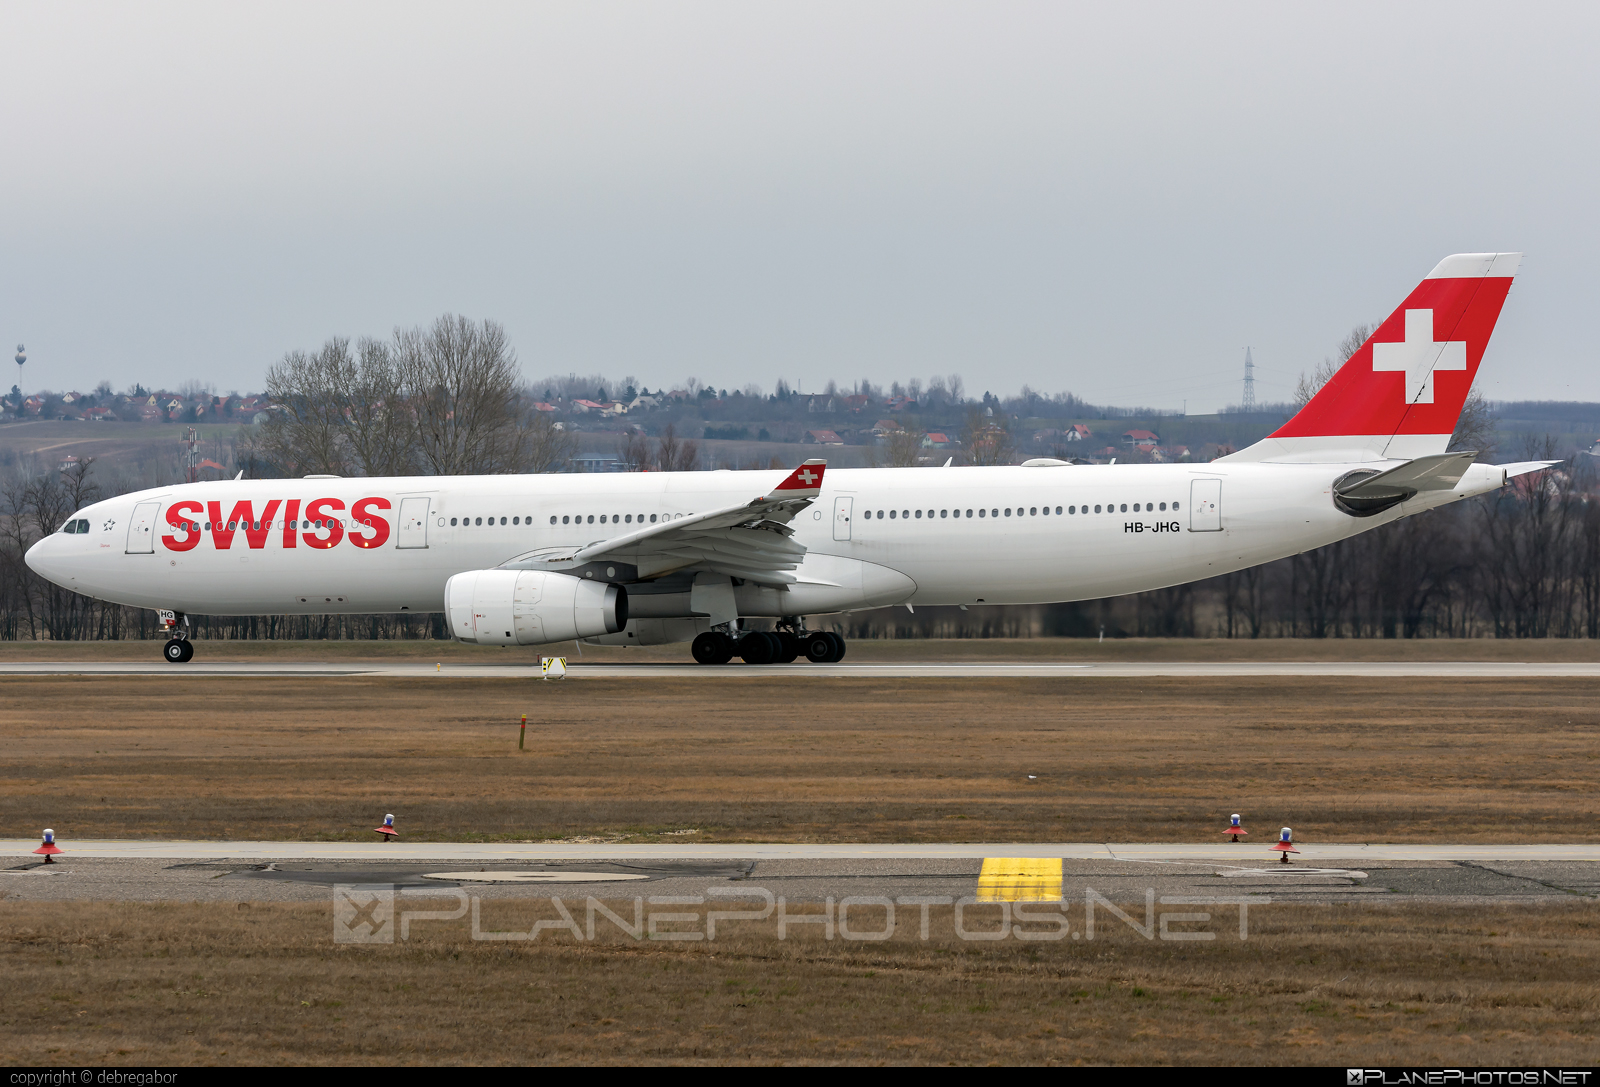 Airbus A330-343 - HB-JHG operated by Swiss International Air Lines #a330 #a330family #airbus #airbus330 #swiss #swissairlines